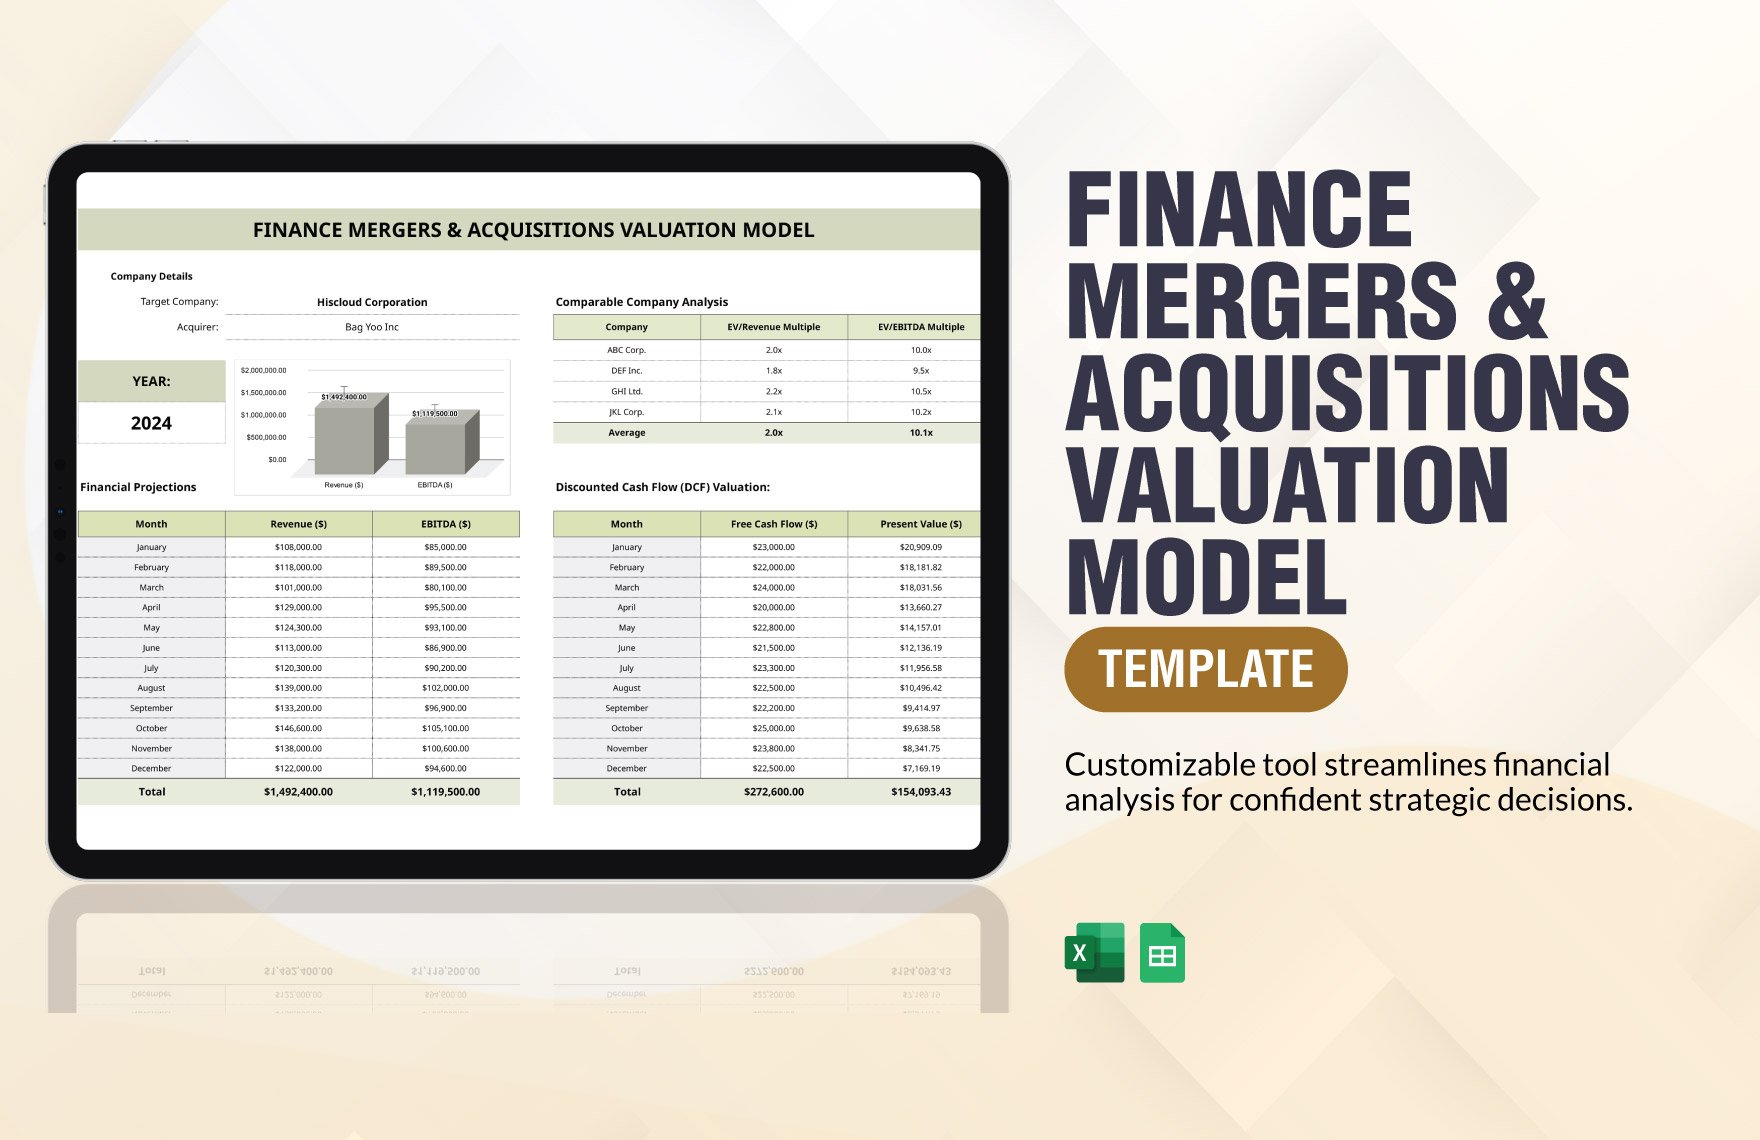 Finance Mergers & Acquisitions Valuation Model Template